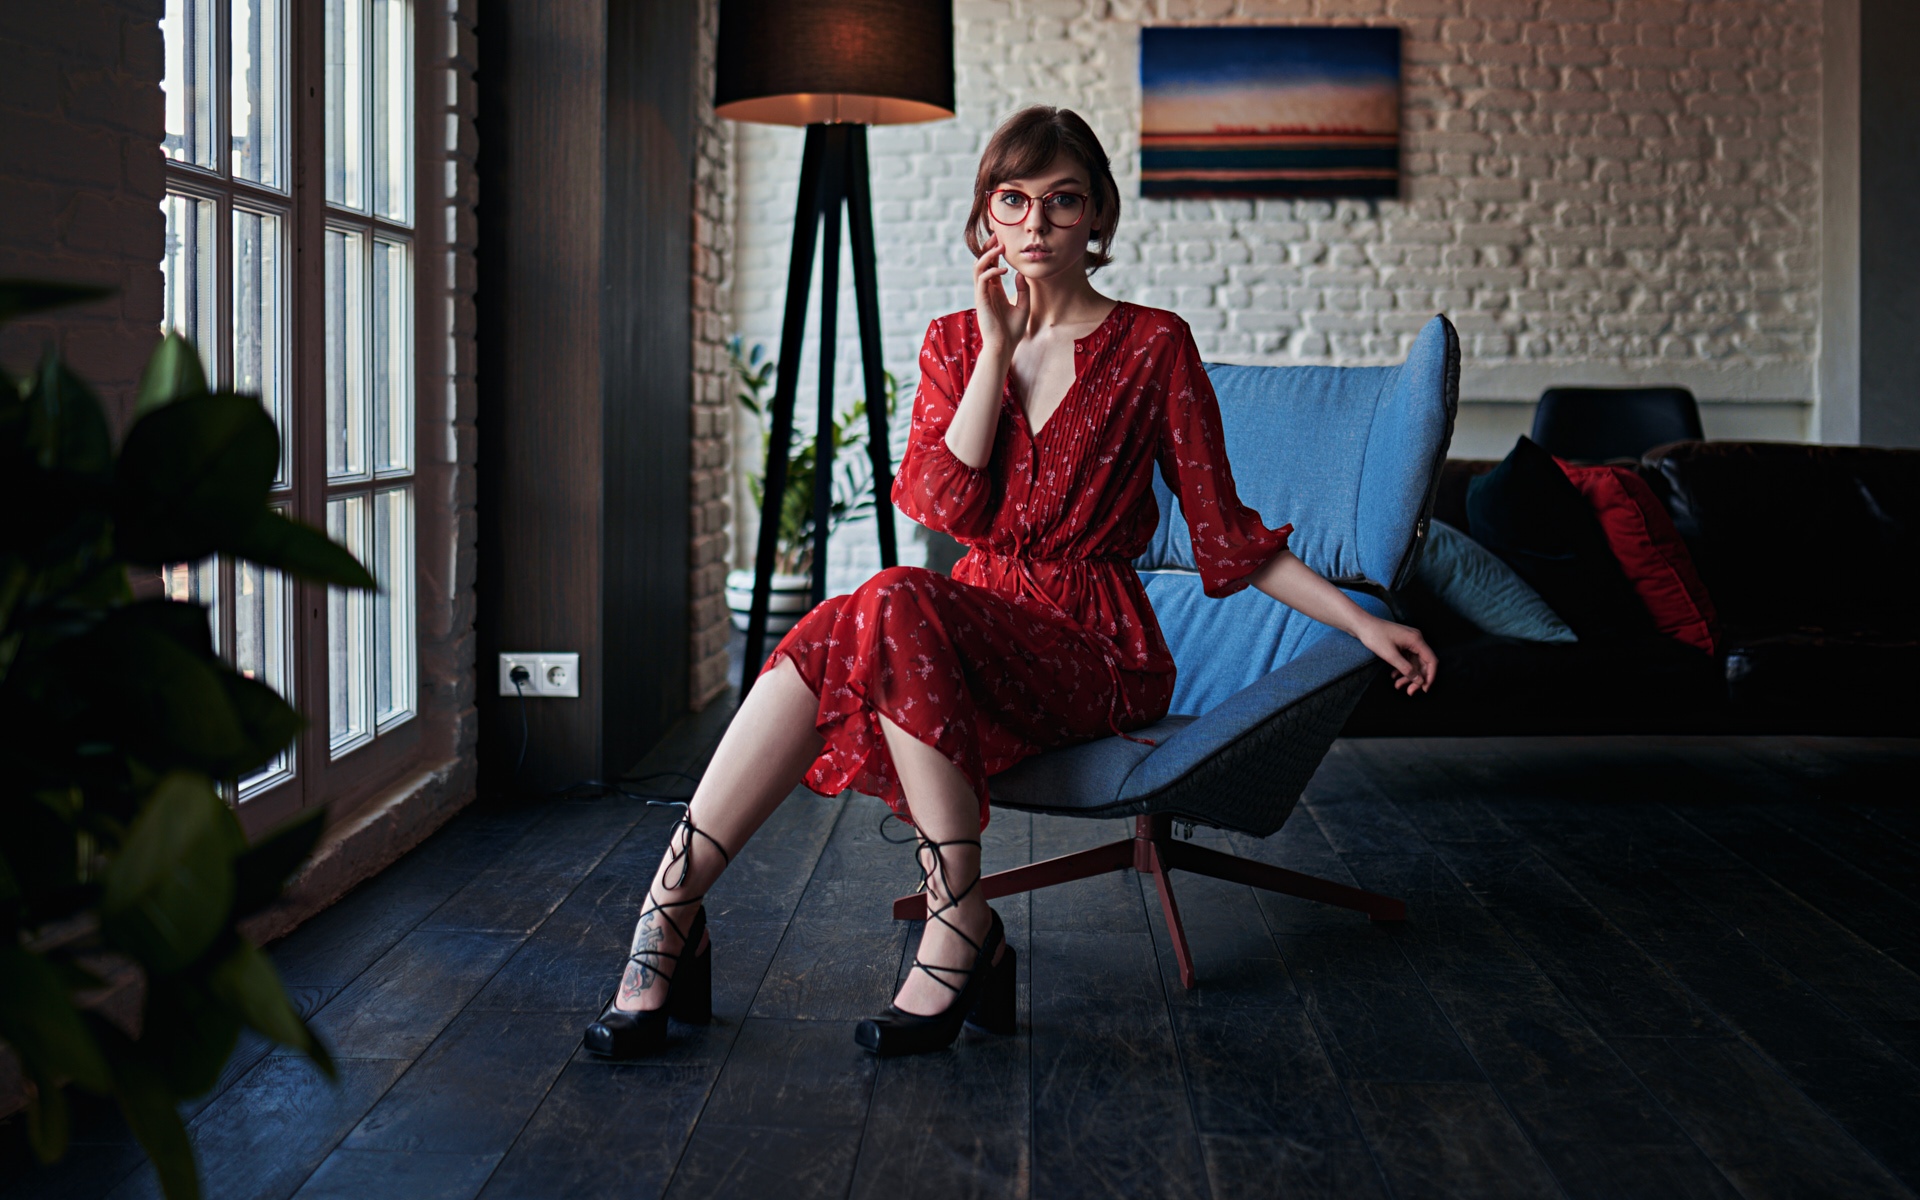 People 1920x1200 Olya Pushkina women model brunette looking at viewer women with glasses glasses indoors dress red dress heels sitting chair couch lamp window tattoo bokeh wall picture frames portrait women indoors Sergey Zhirnov